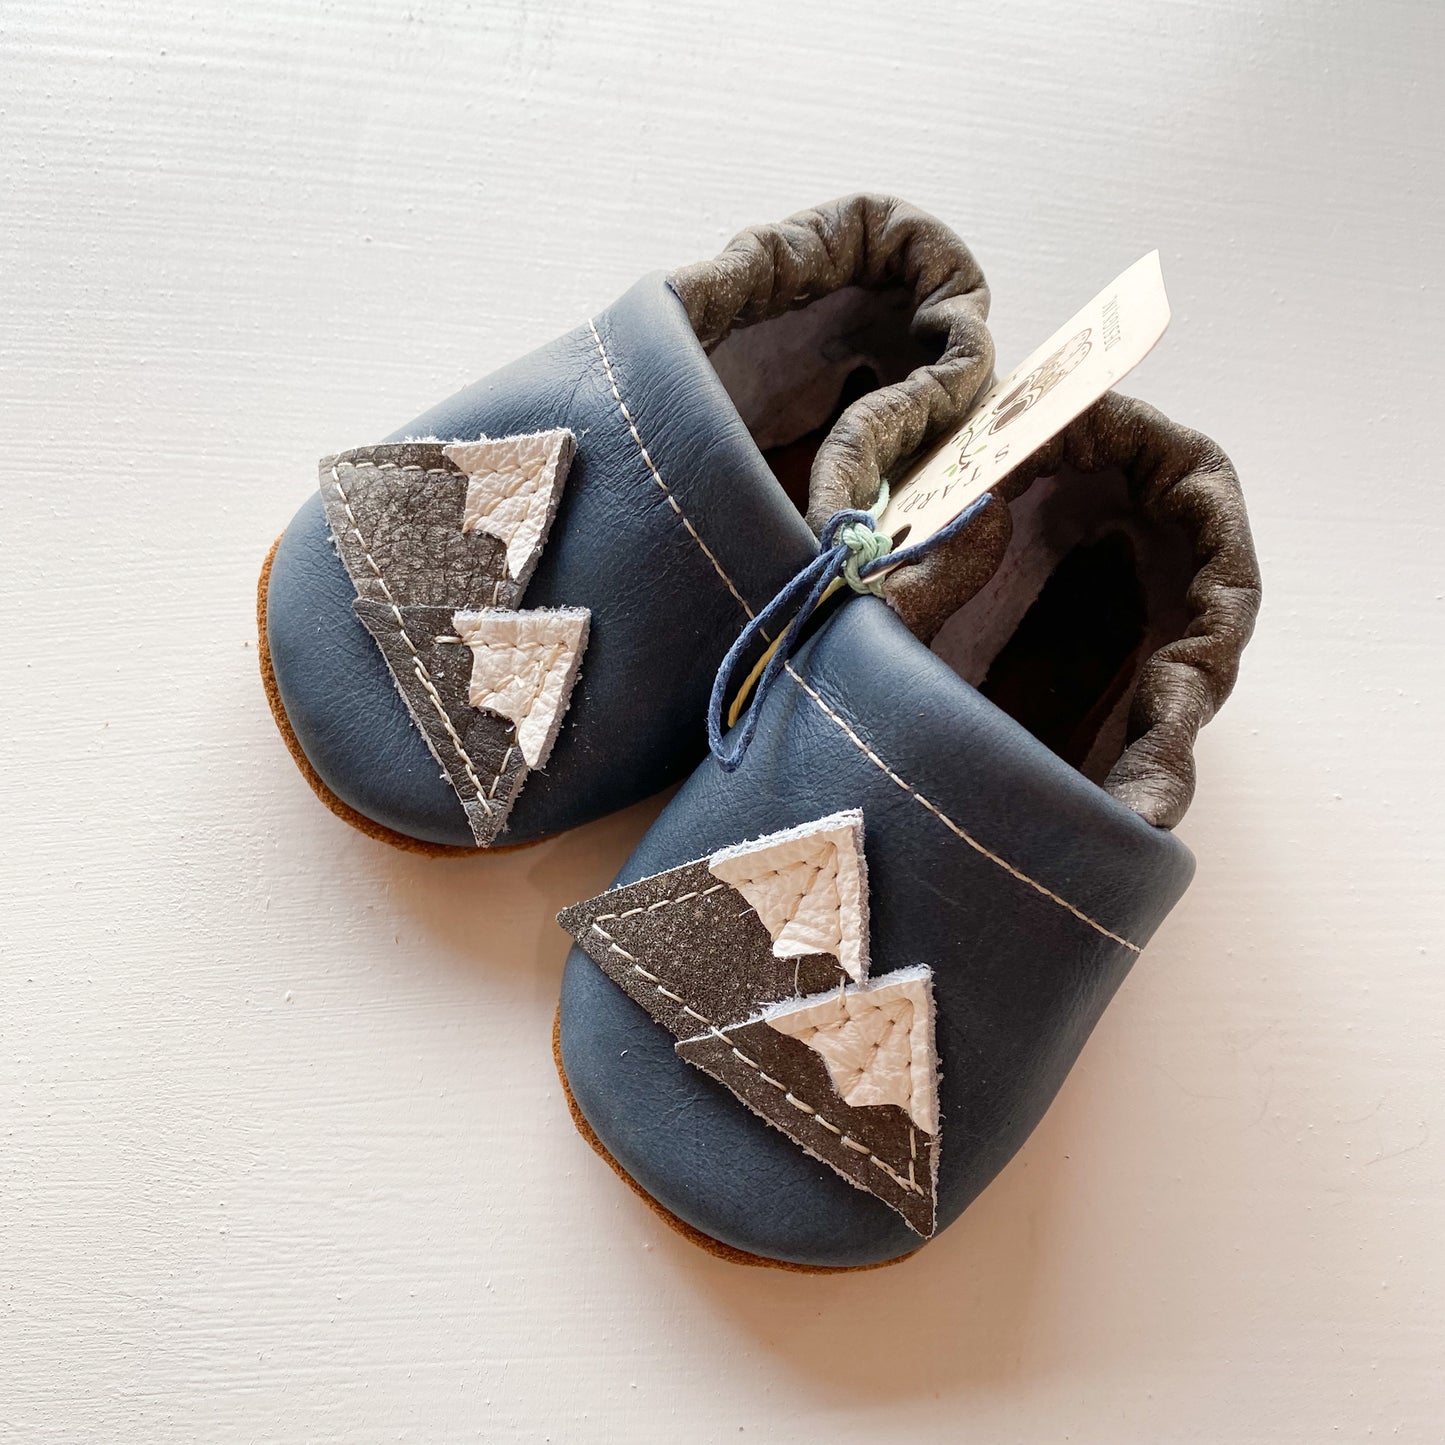 Shoes with Designs - Denim mtns  in Navy